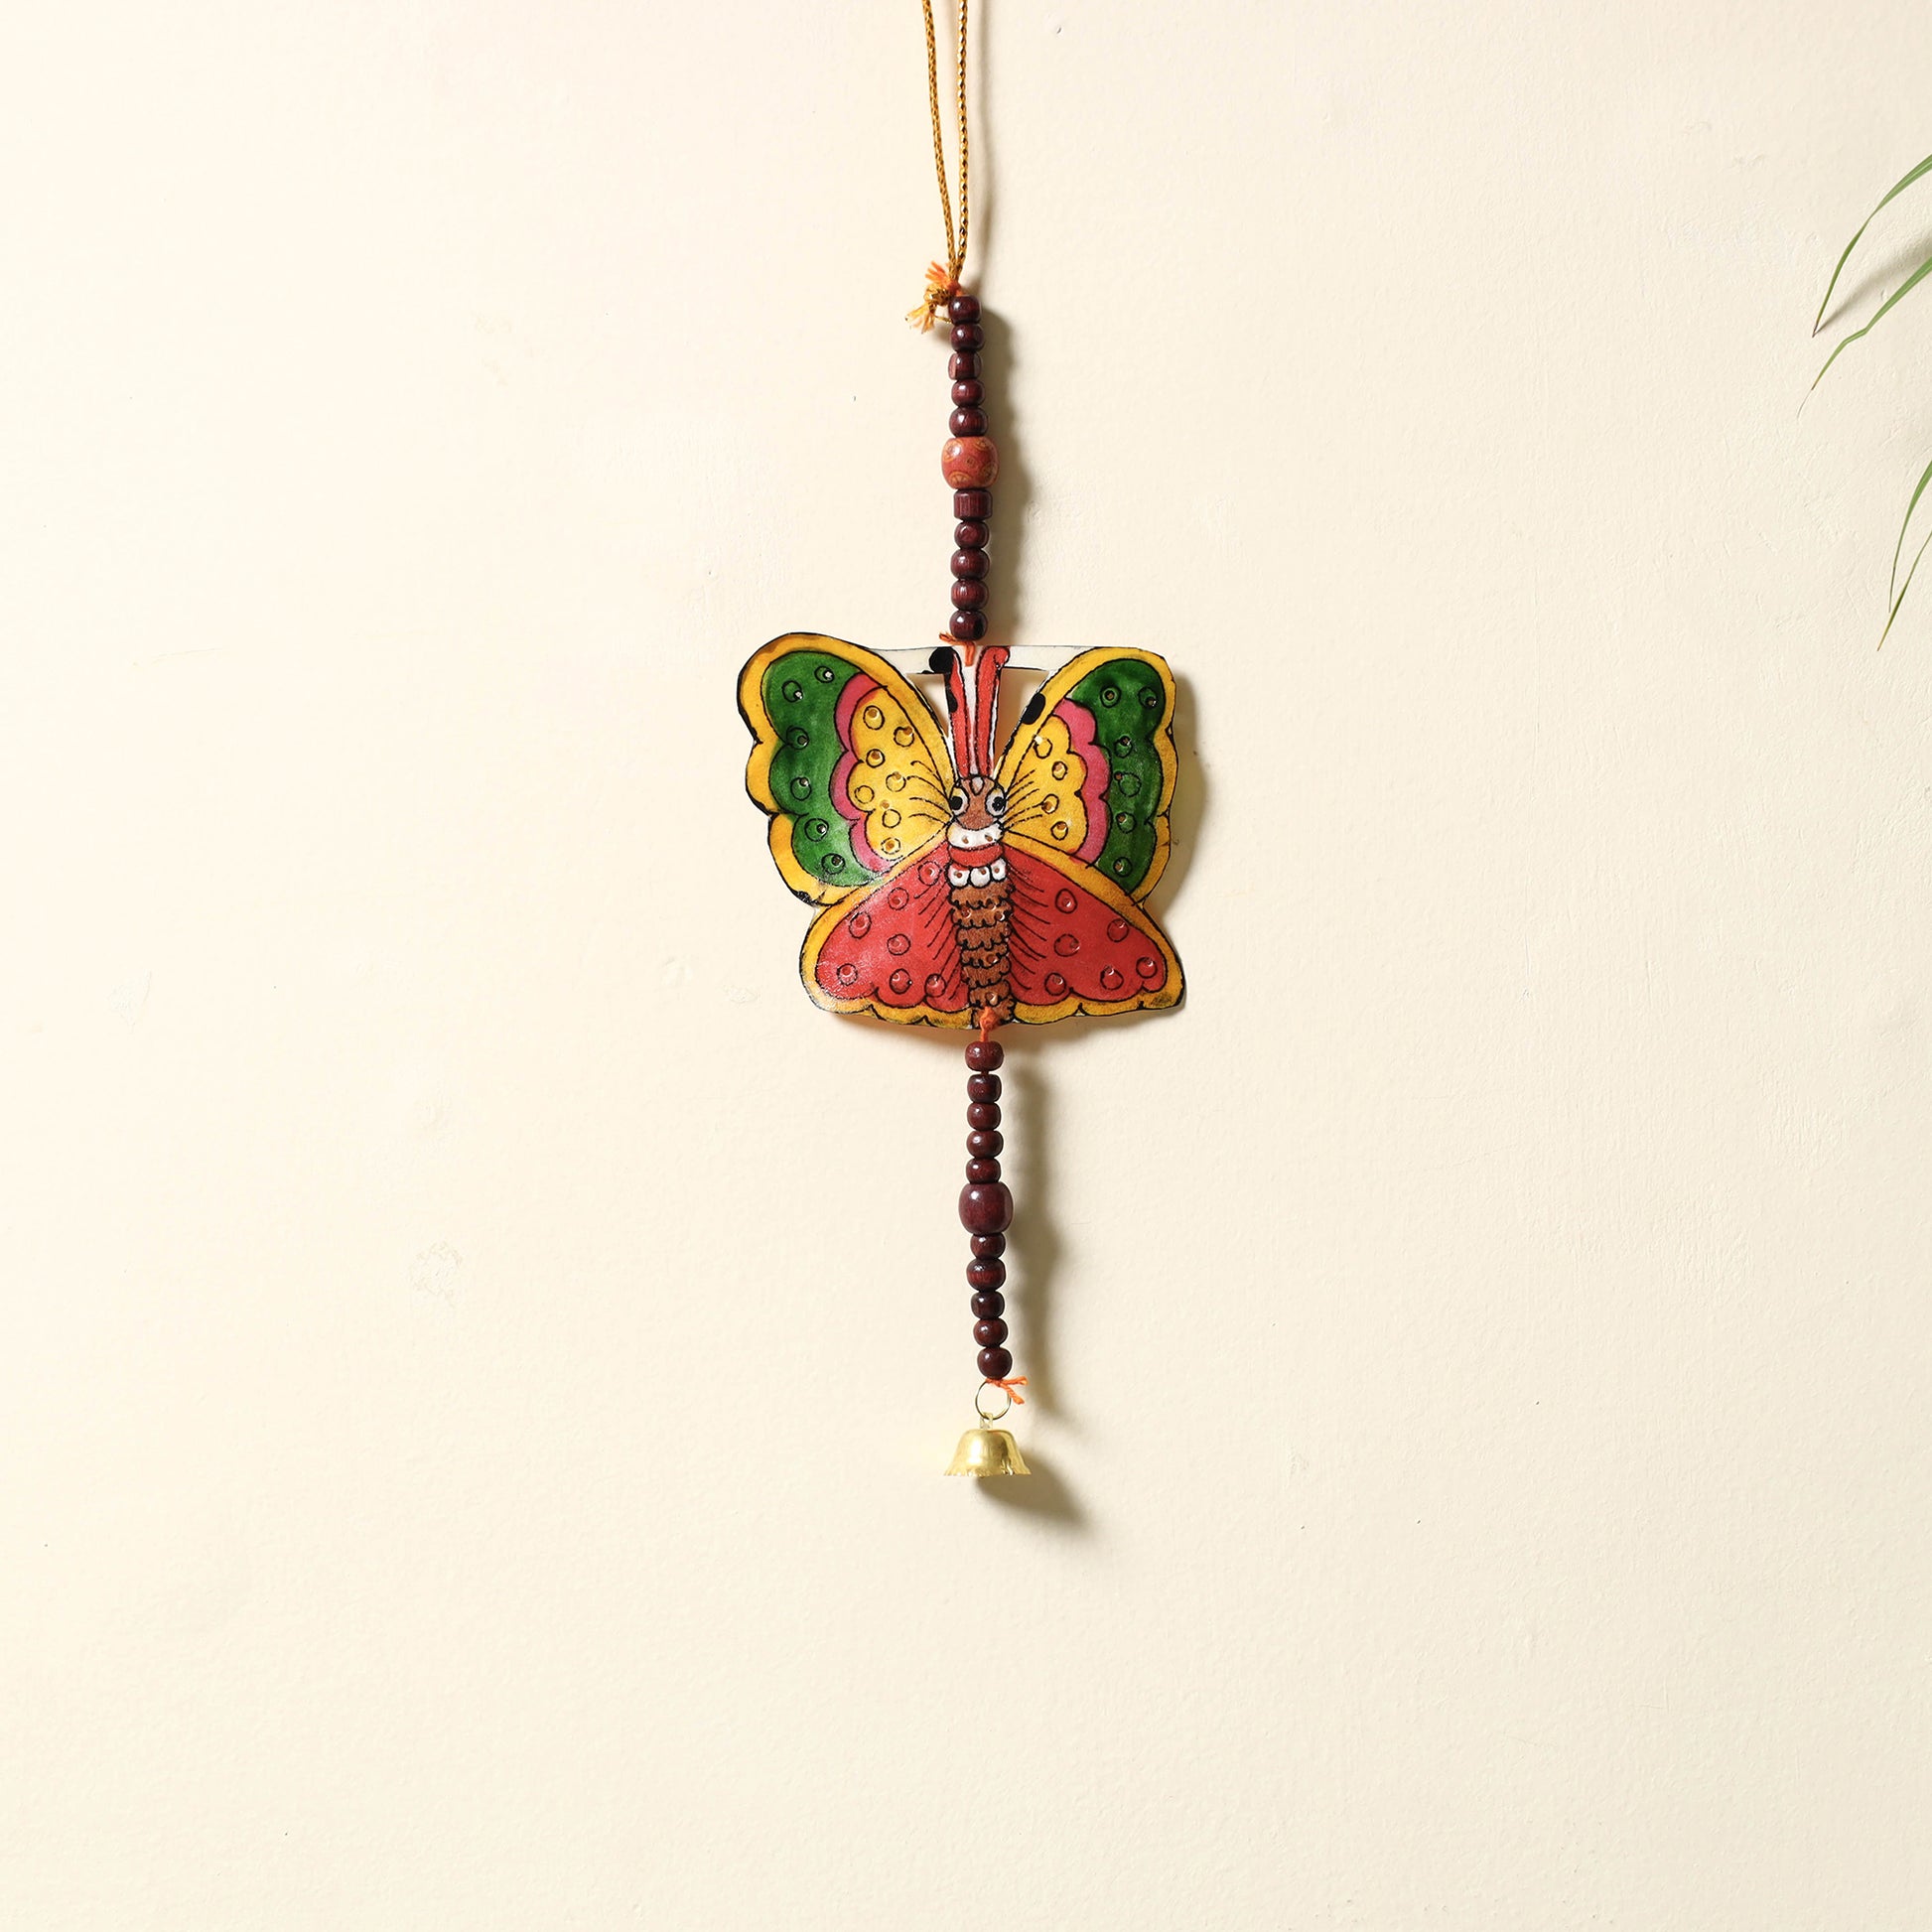 puppet wall hanging 